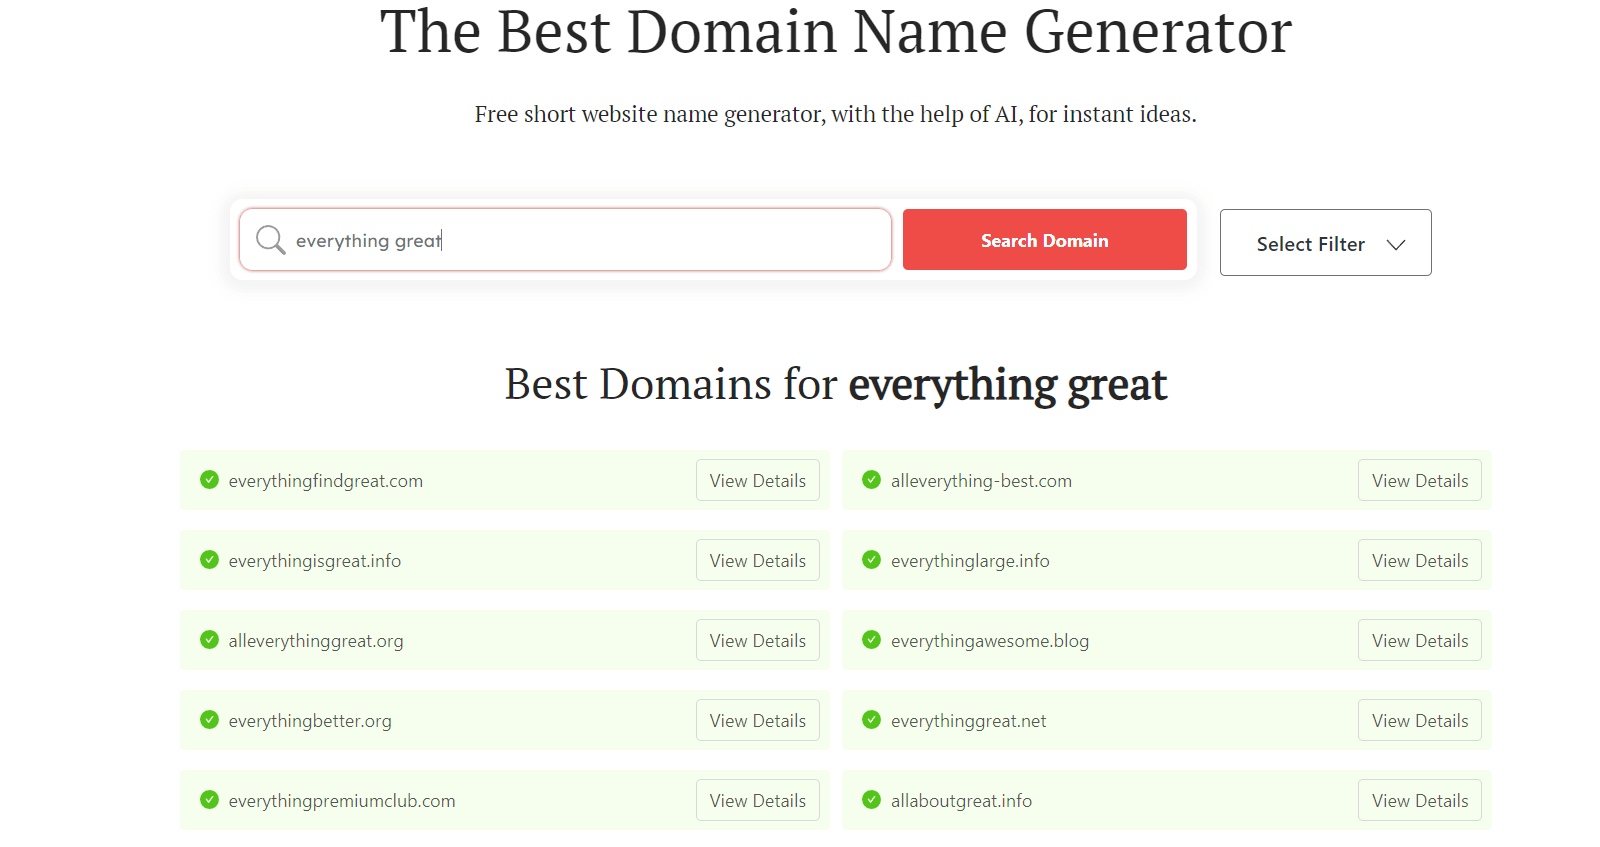 DomainWheel lifestyle blog names generator name suggestions for "everything great"